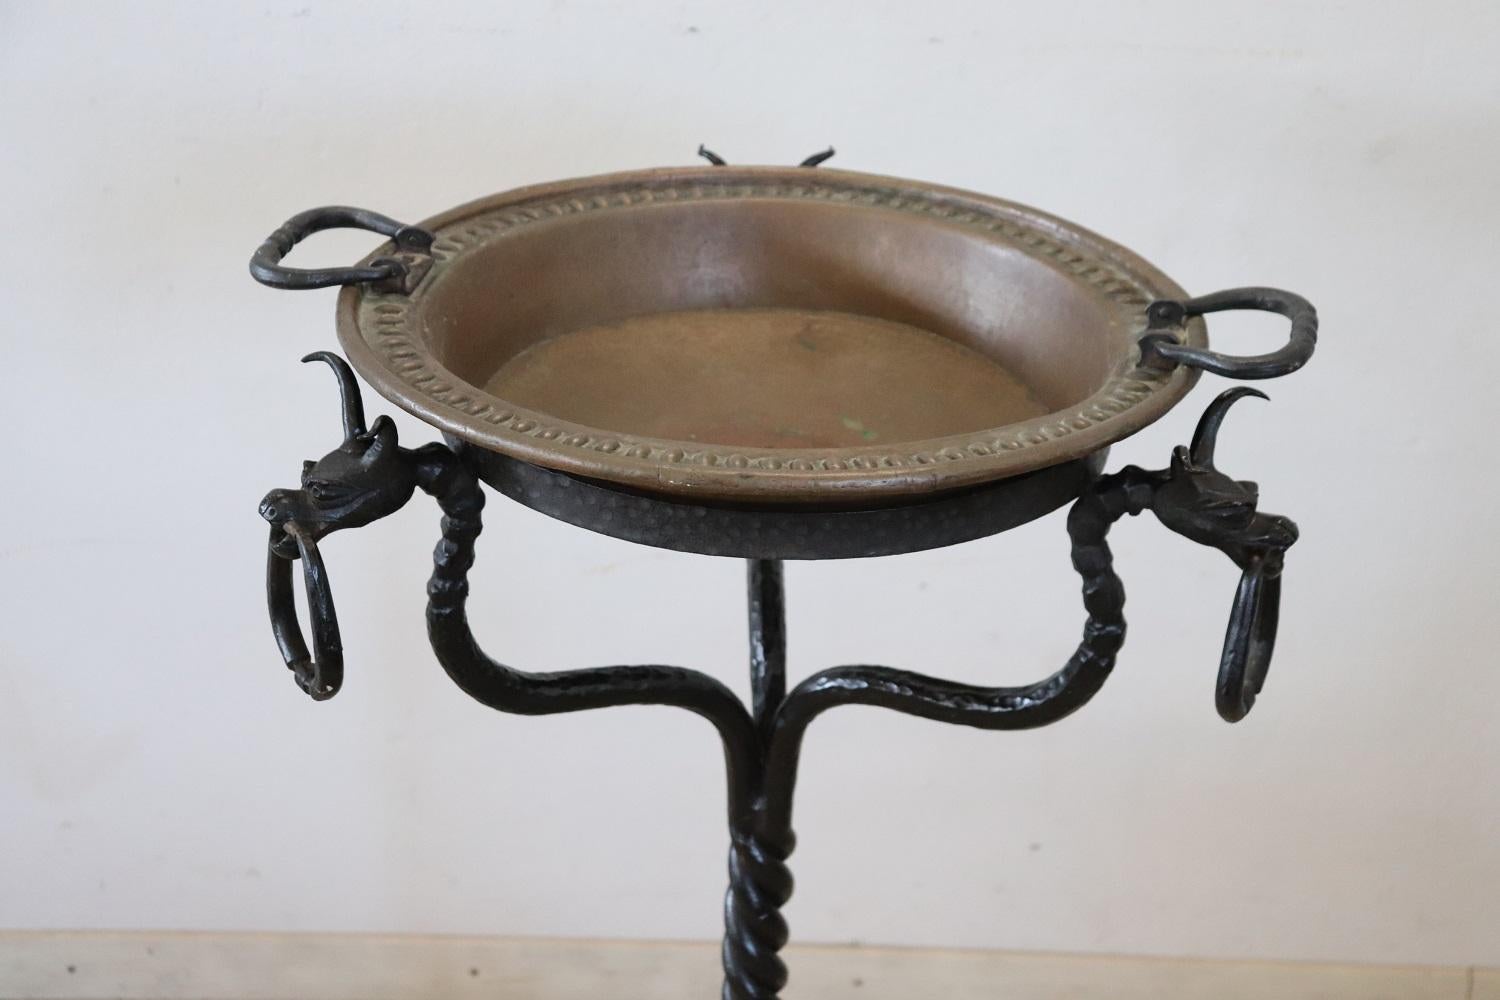 This brazier from the 16th century Renaissance era is truly rare. The fire pit features a copper vessel and a beautifully crafted hand-forged iron pedestal. The pedestal has three feet and a decoration with grotesque figures. The copper vessel is